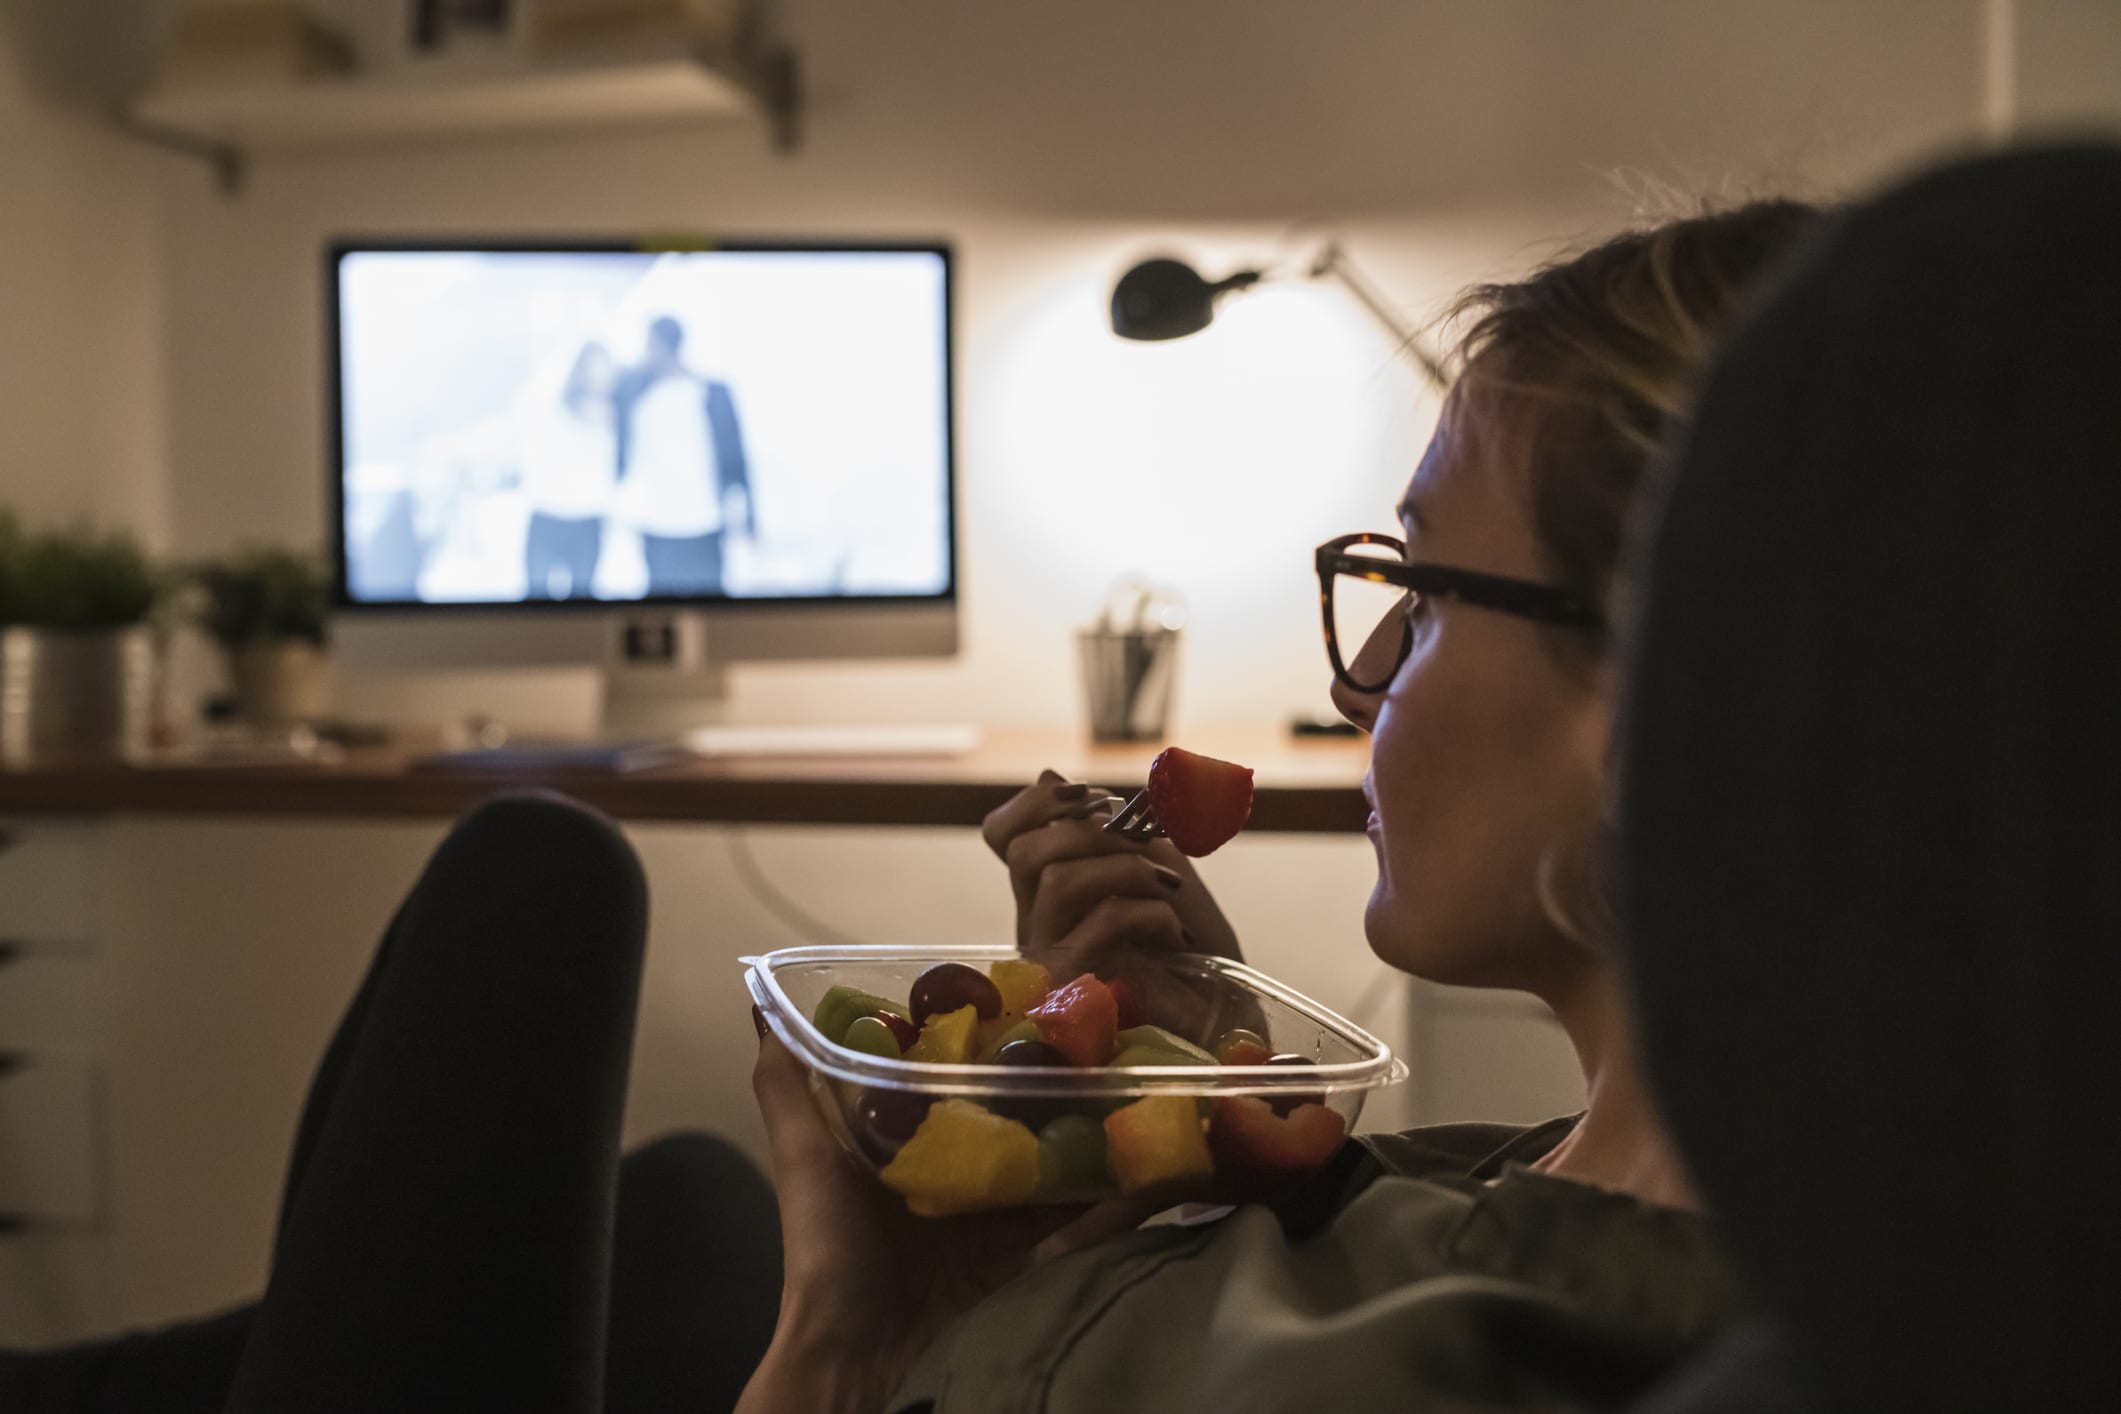 Woman relaxing in front of TV with fruit salad